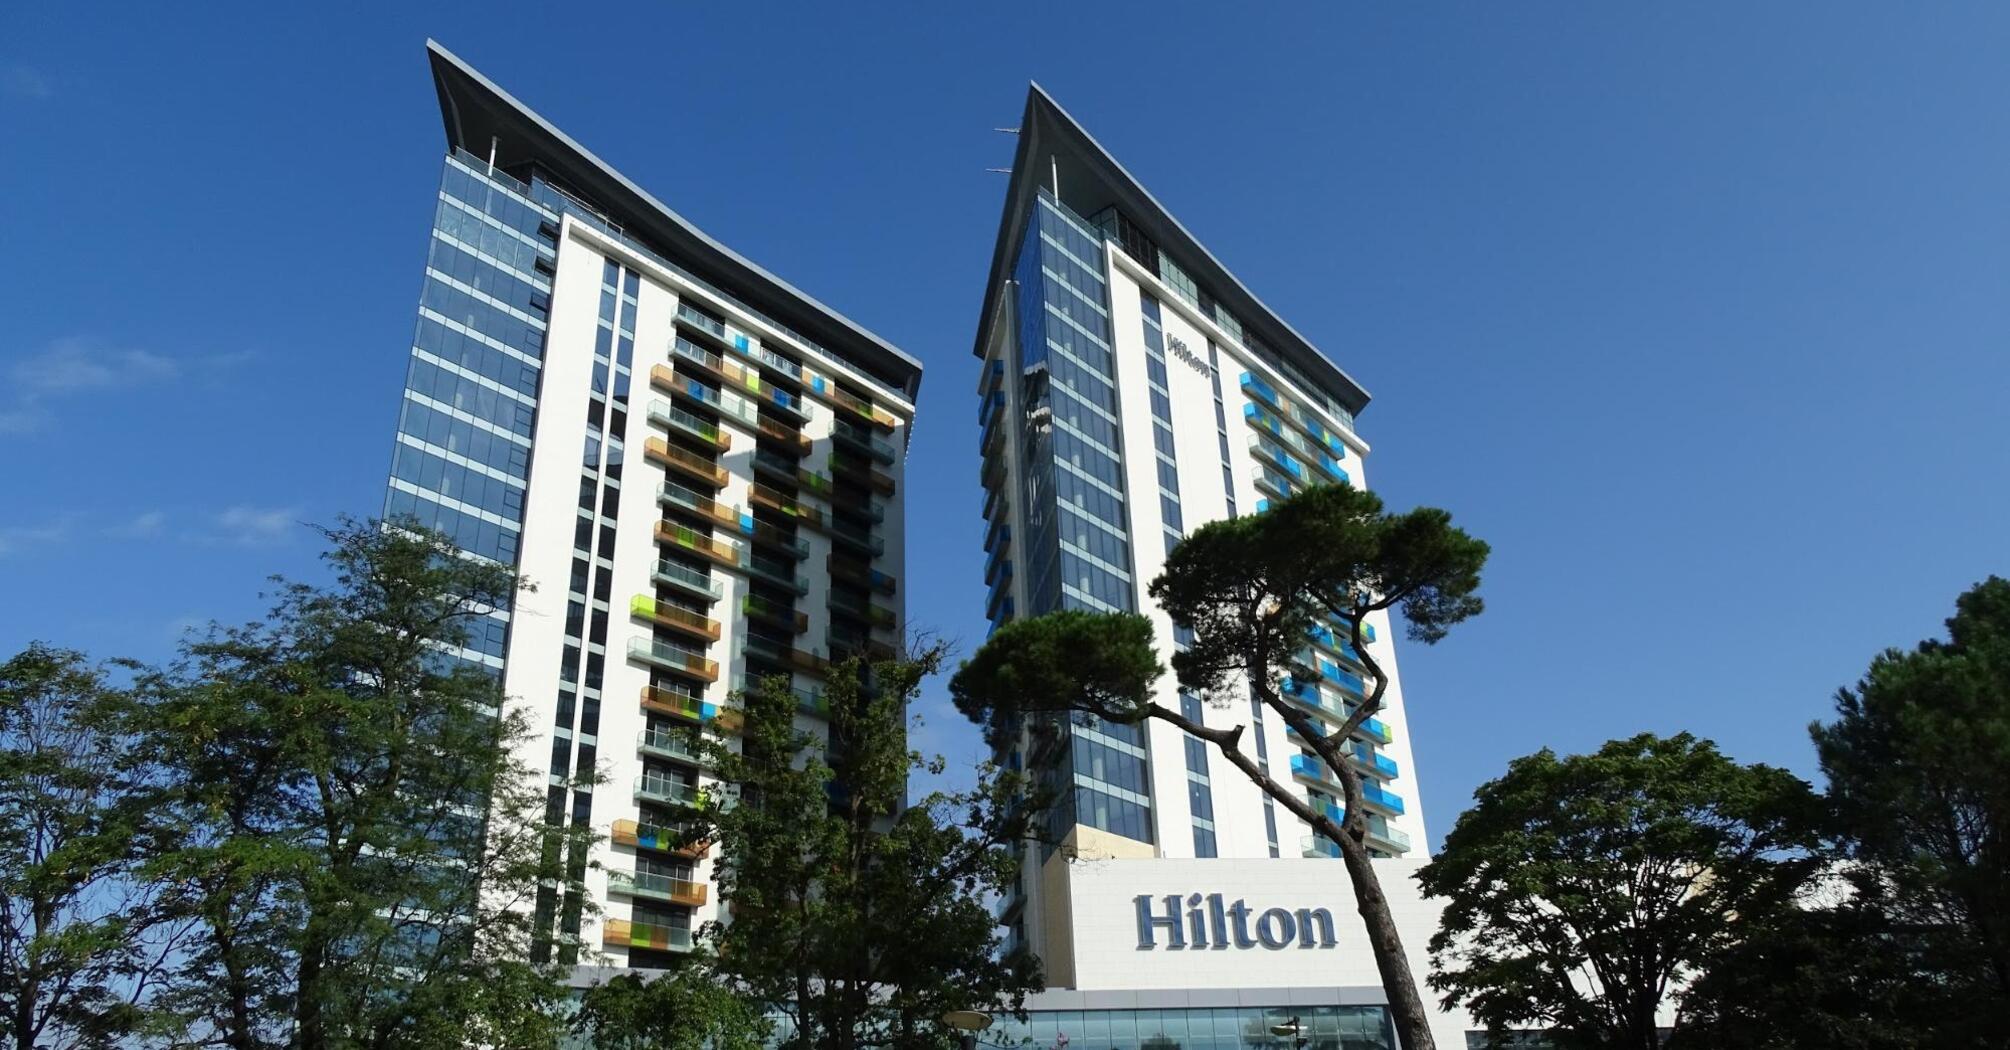 Hilton hotel building with name inscription